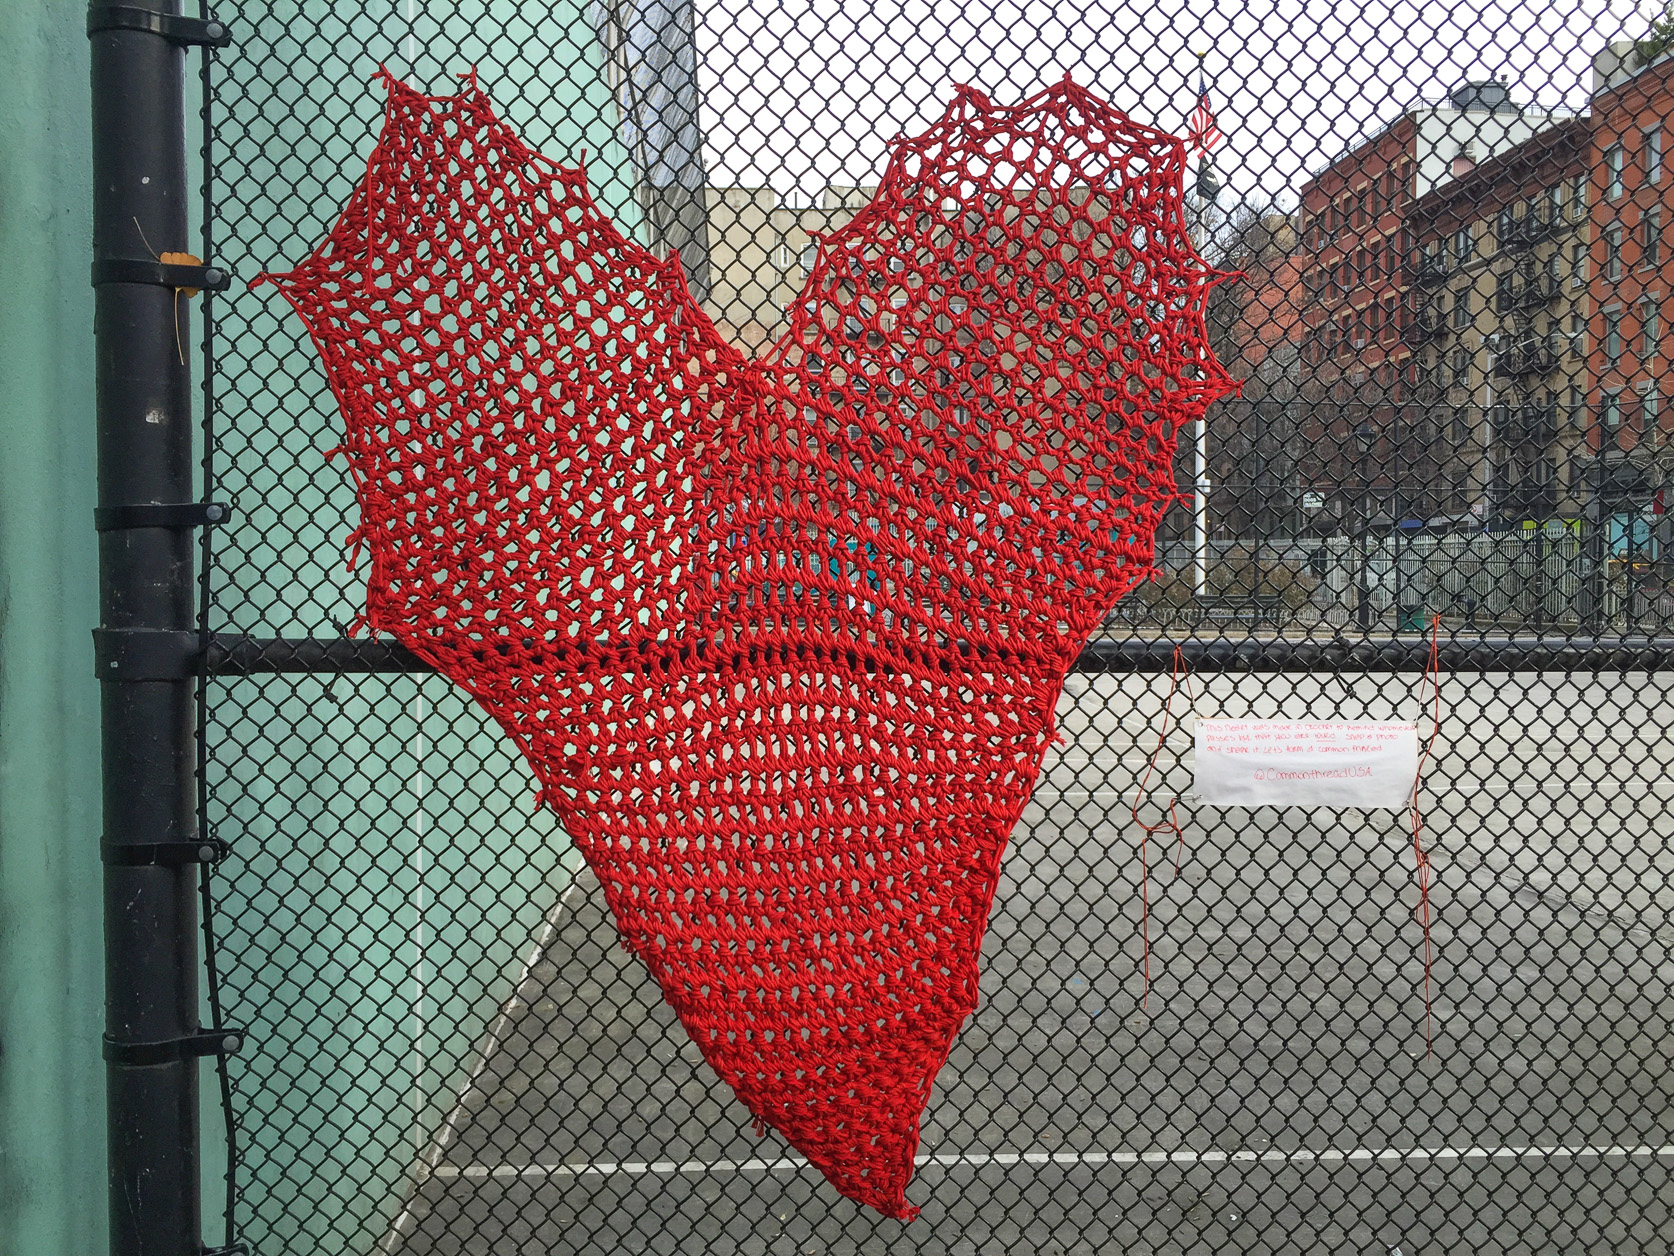 A crocheted heart left on the fence on Passannante Ball Field's Sixth Ave. side before Valentine's Day.   Photo by Tequila Minsky